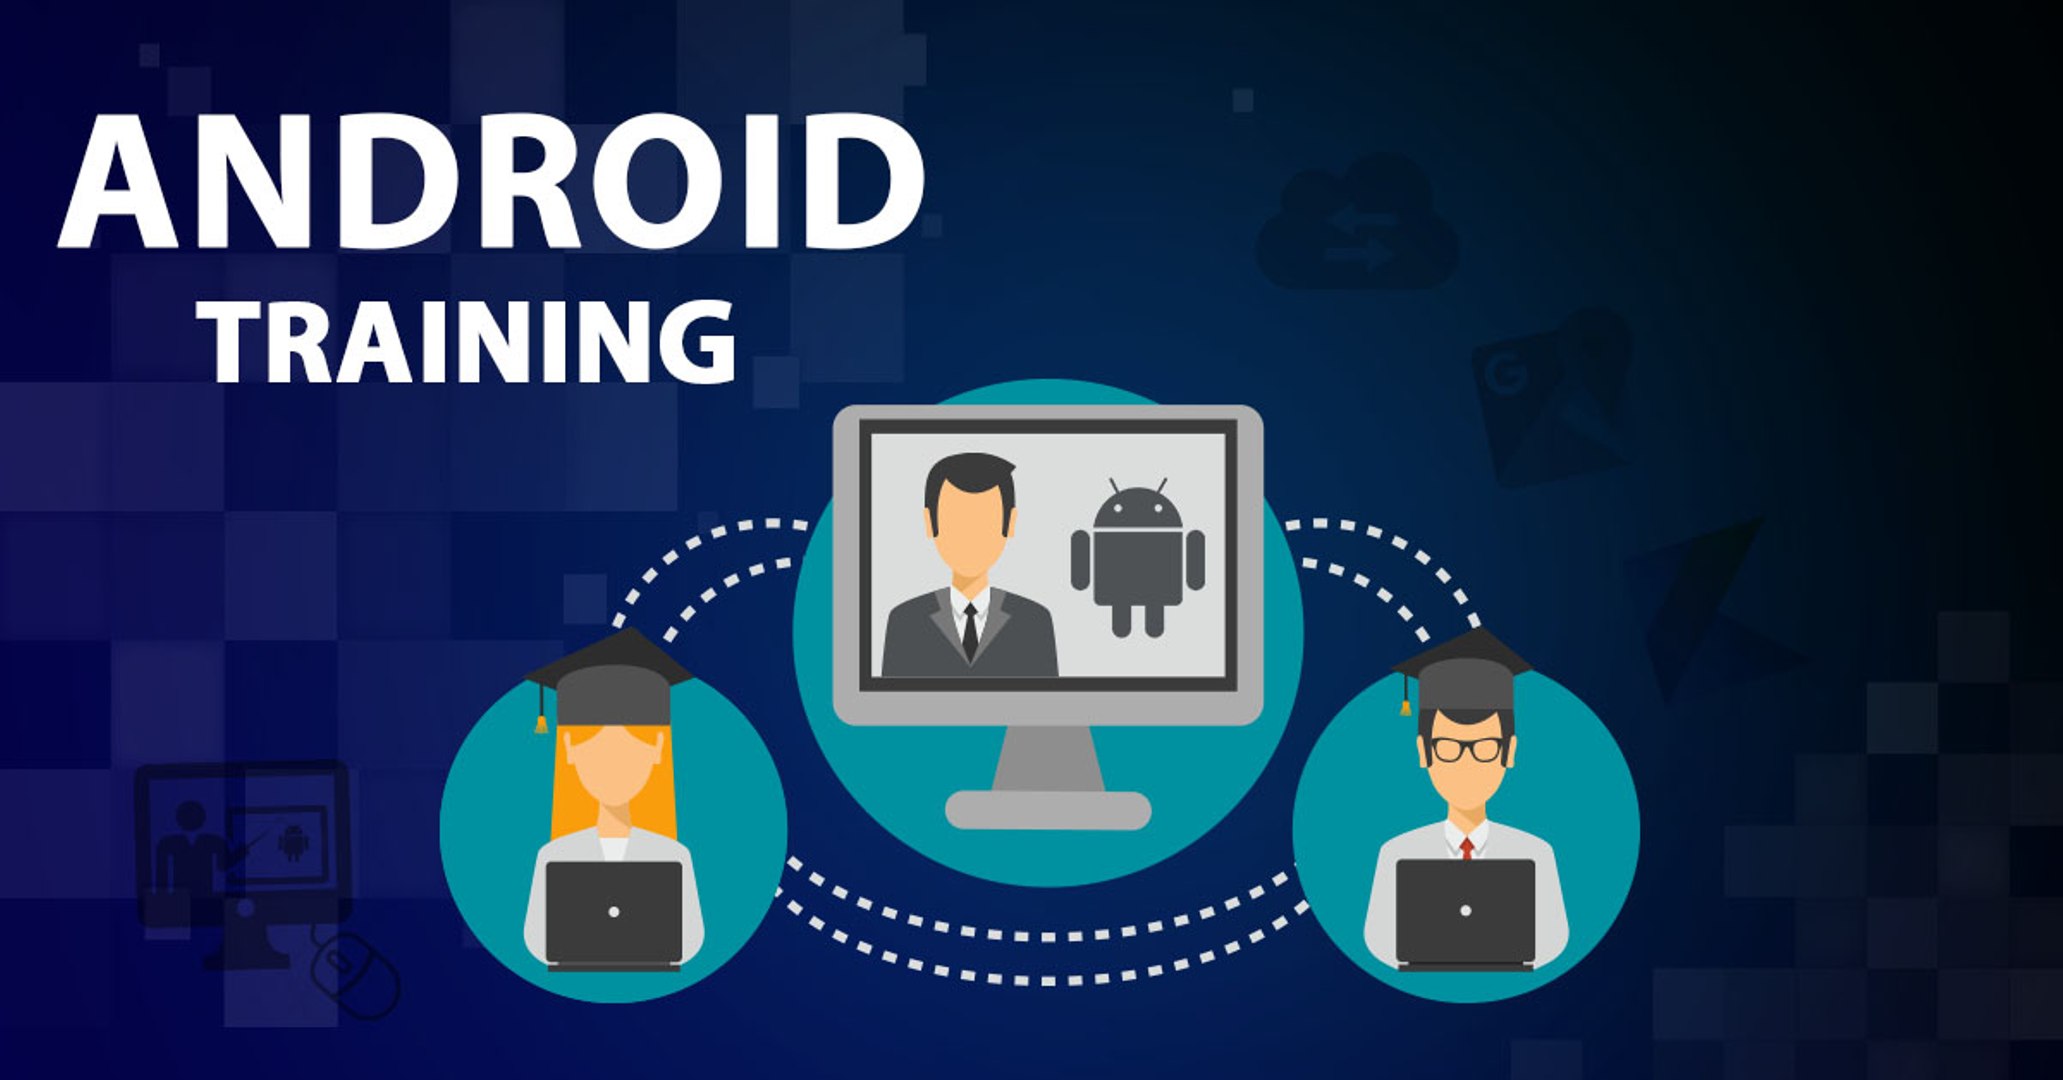 Android Online Training Course with Kotlin and Java Programming - LearnTheNew